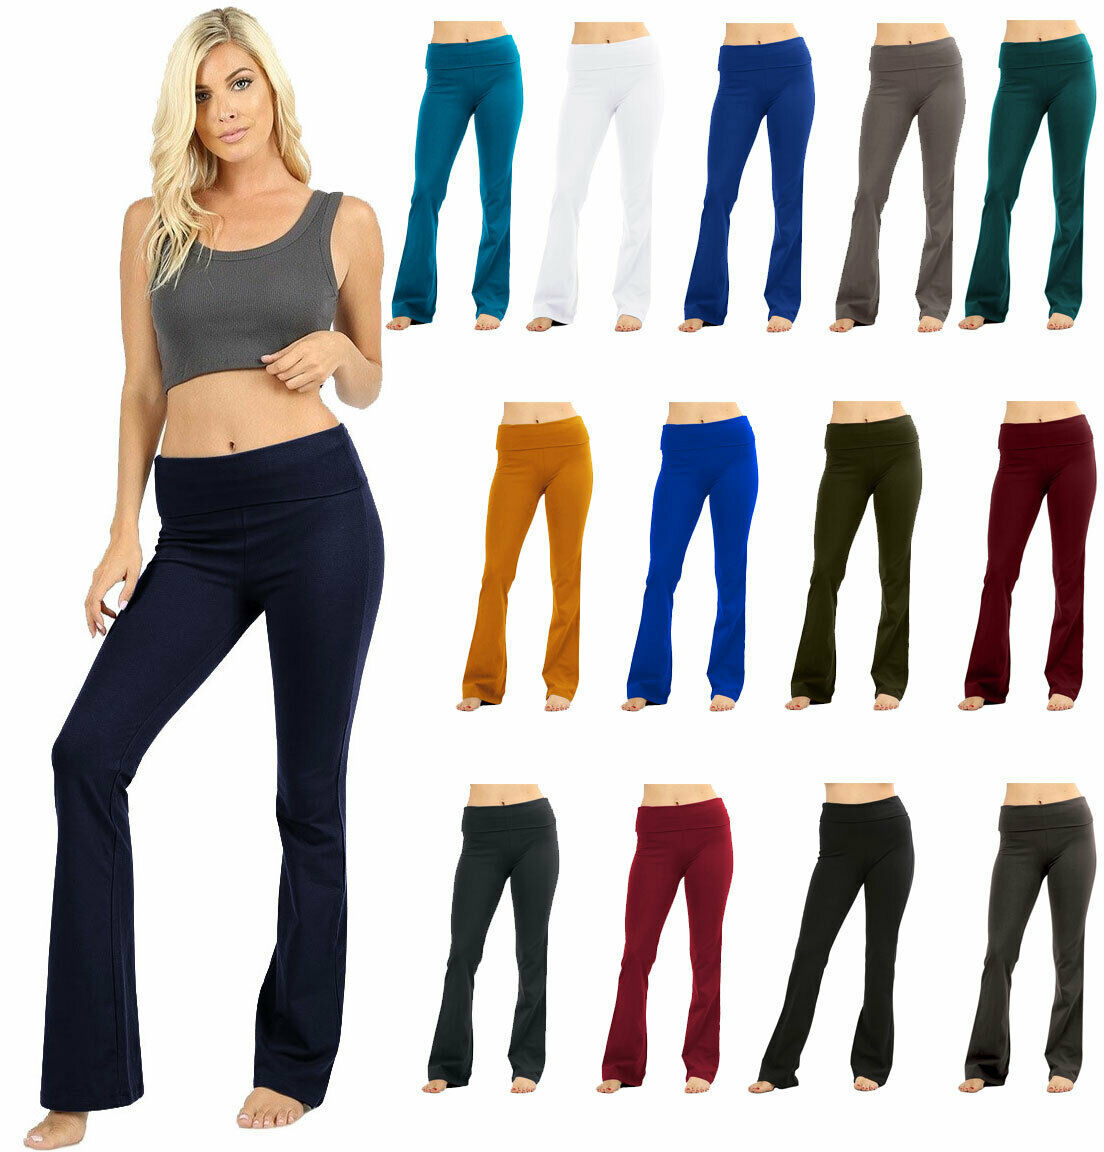 Womens Solid Cotton Foldover Boot Cut Flare Yoga Pants